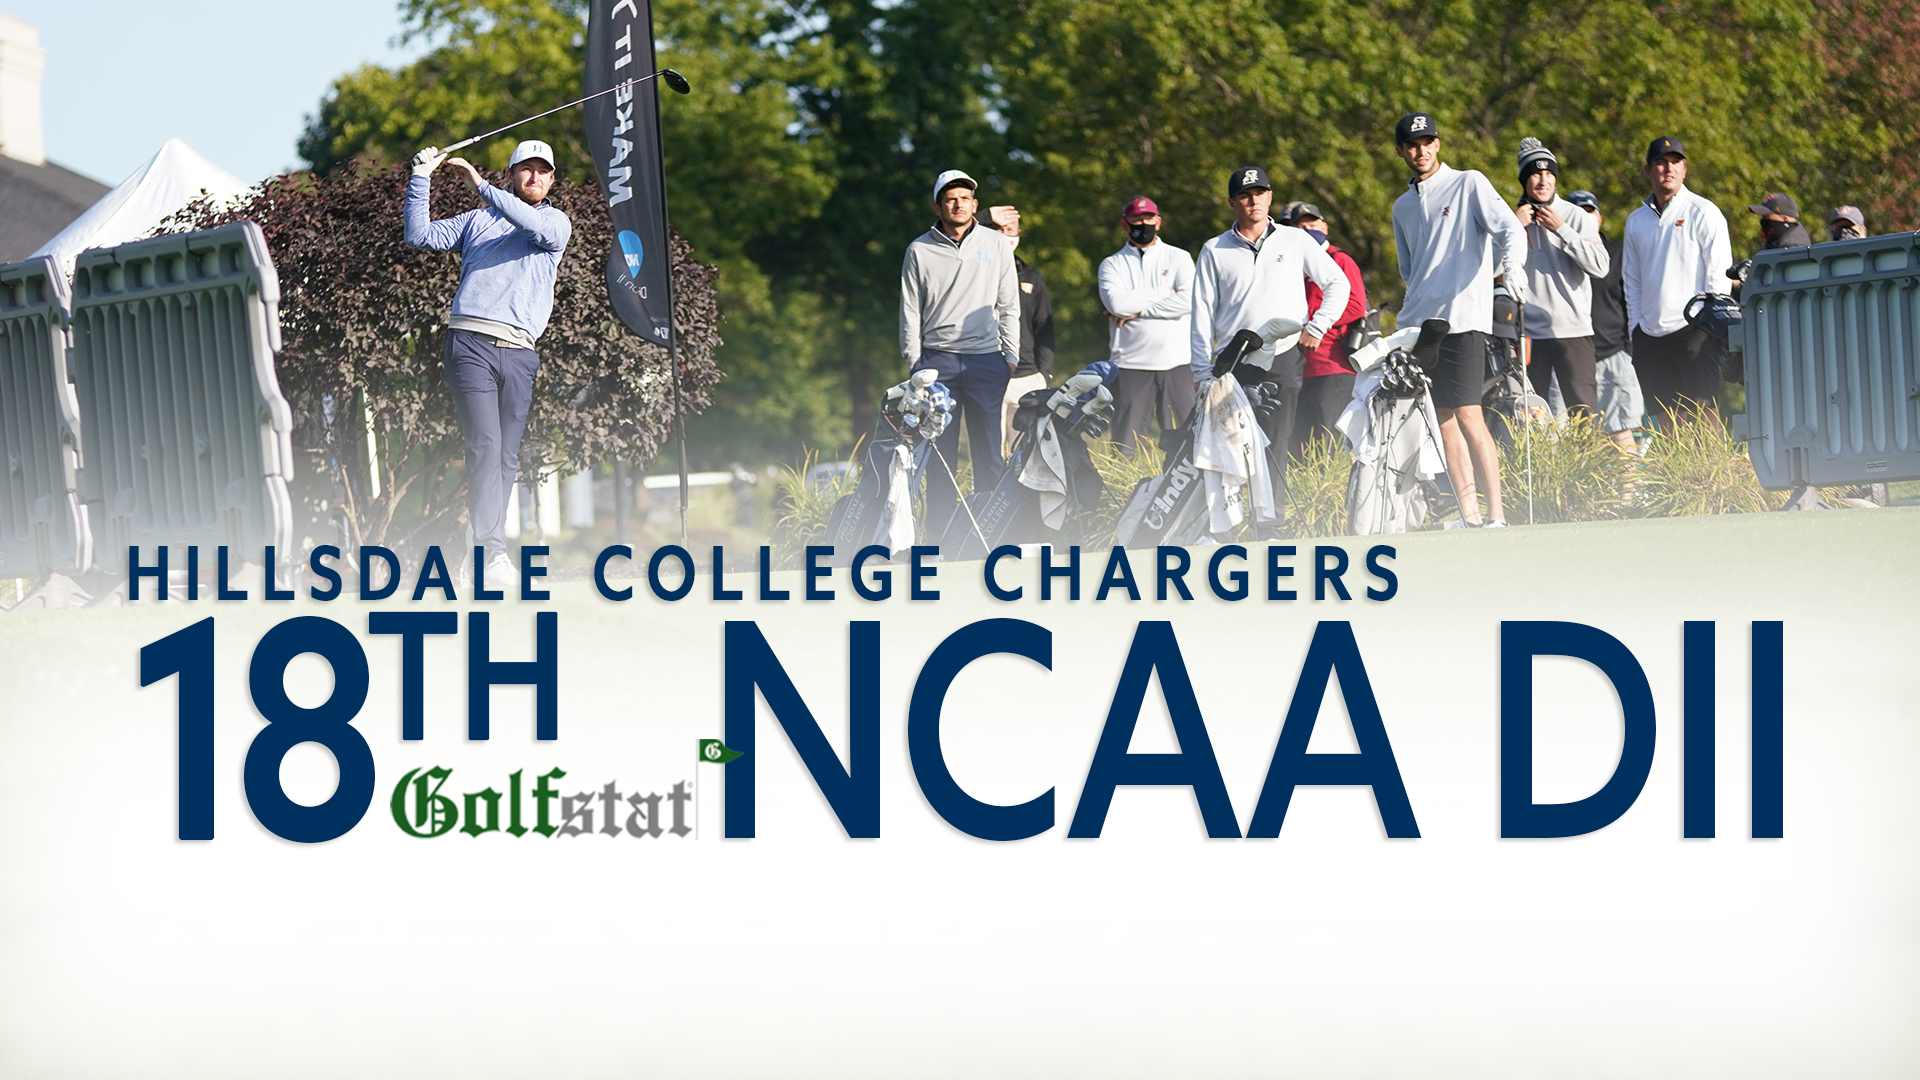 Charger men's golf team ranked 18th in Division II in first Golfstat.com poll